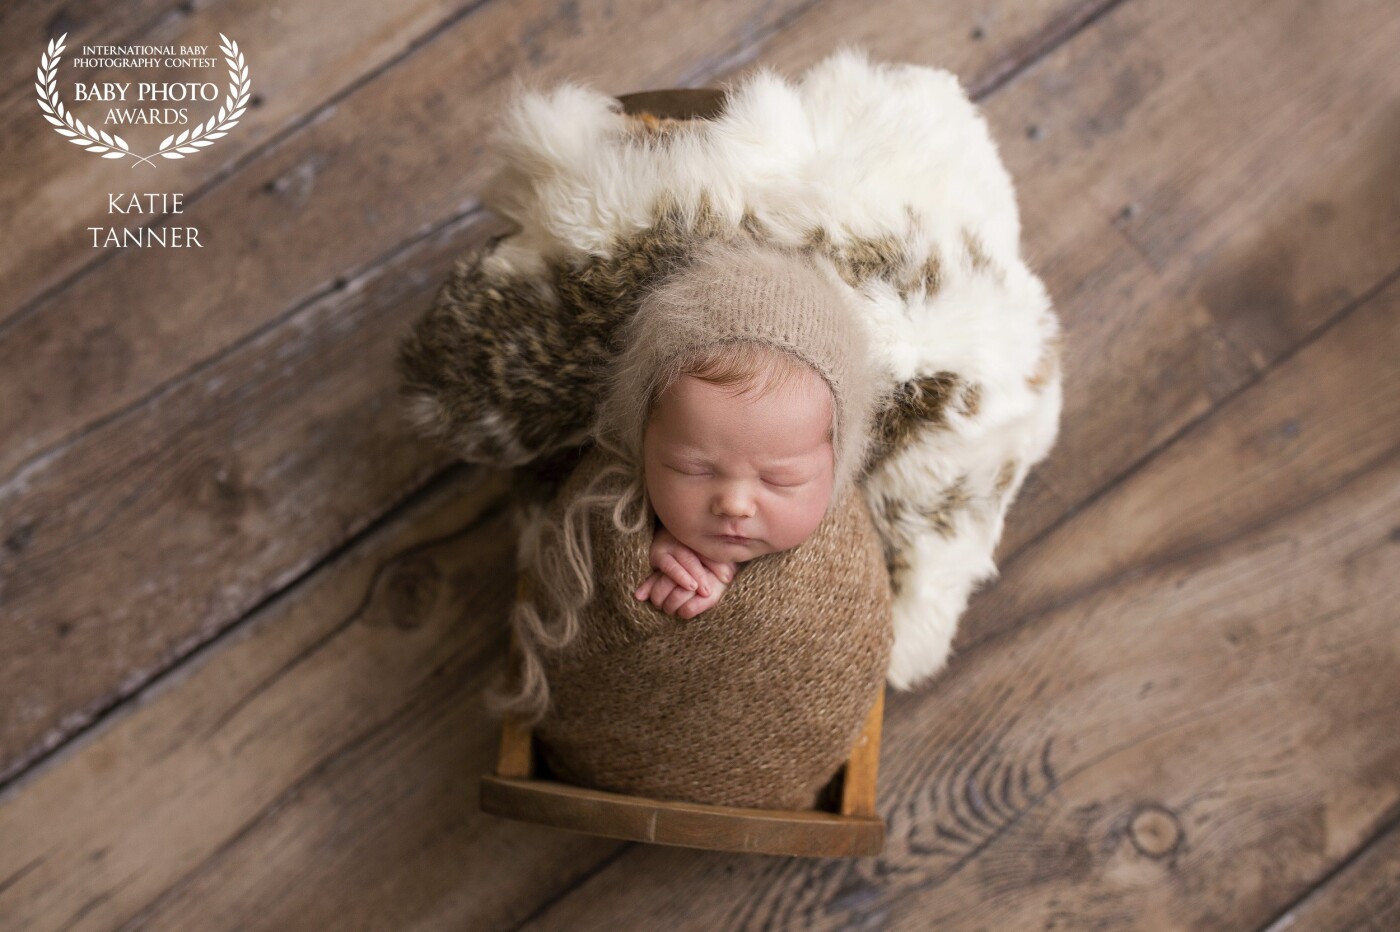 Everette from Dawson creek British Columbia Canada, wearing an angora bonnet and wrap tucked into a handmade wooden newborn bed.